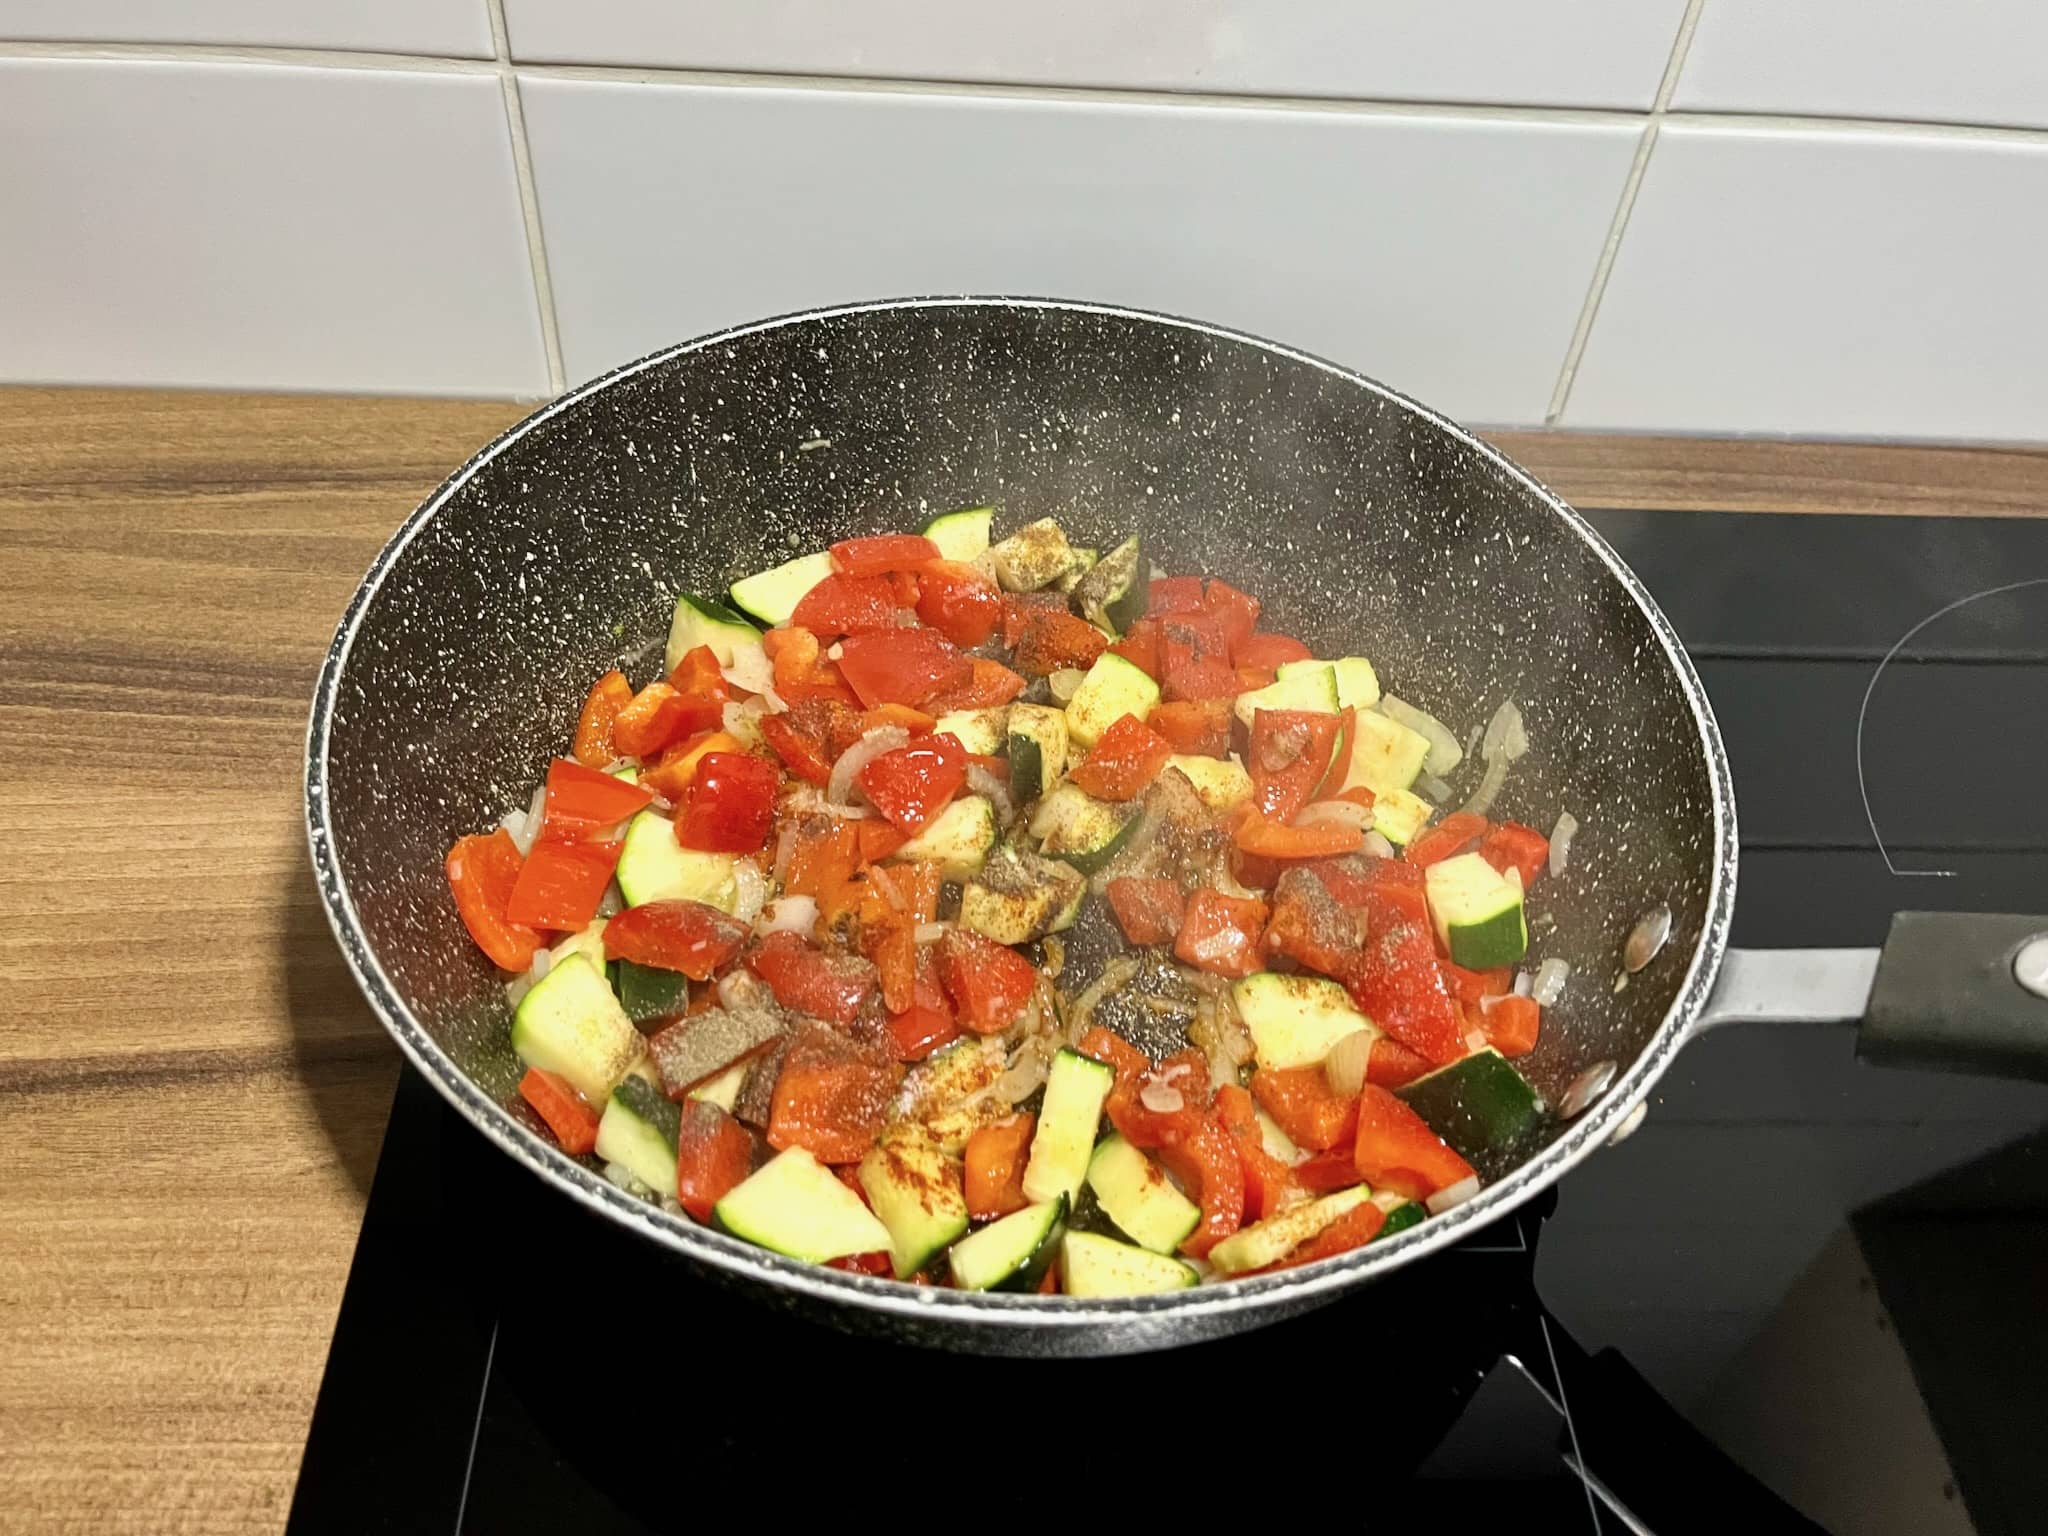 Fried onions, garlic, courgette, and bell pepper in a pan